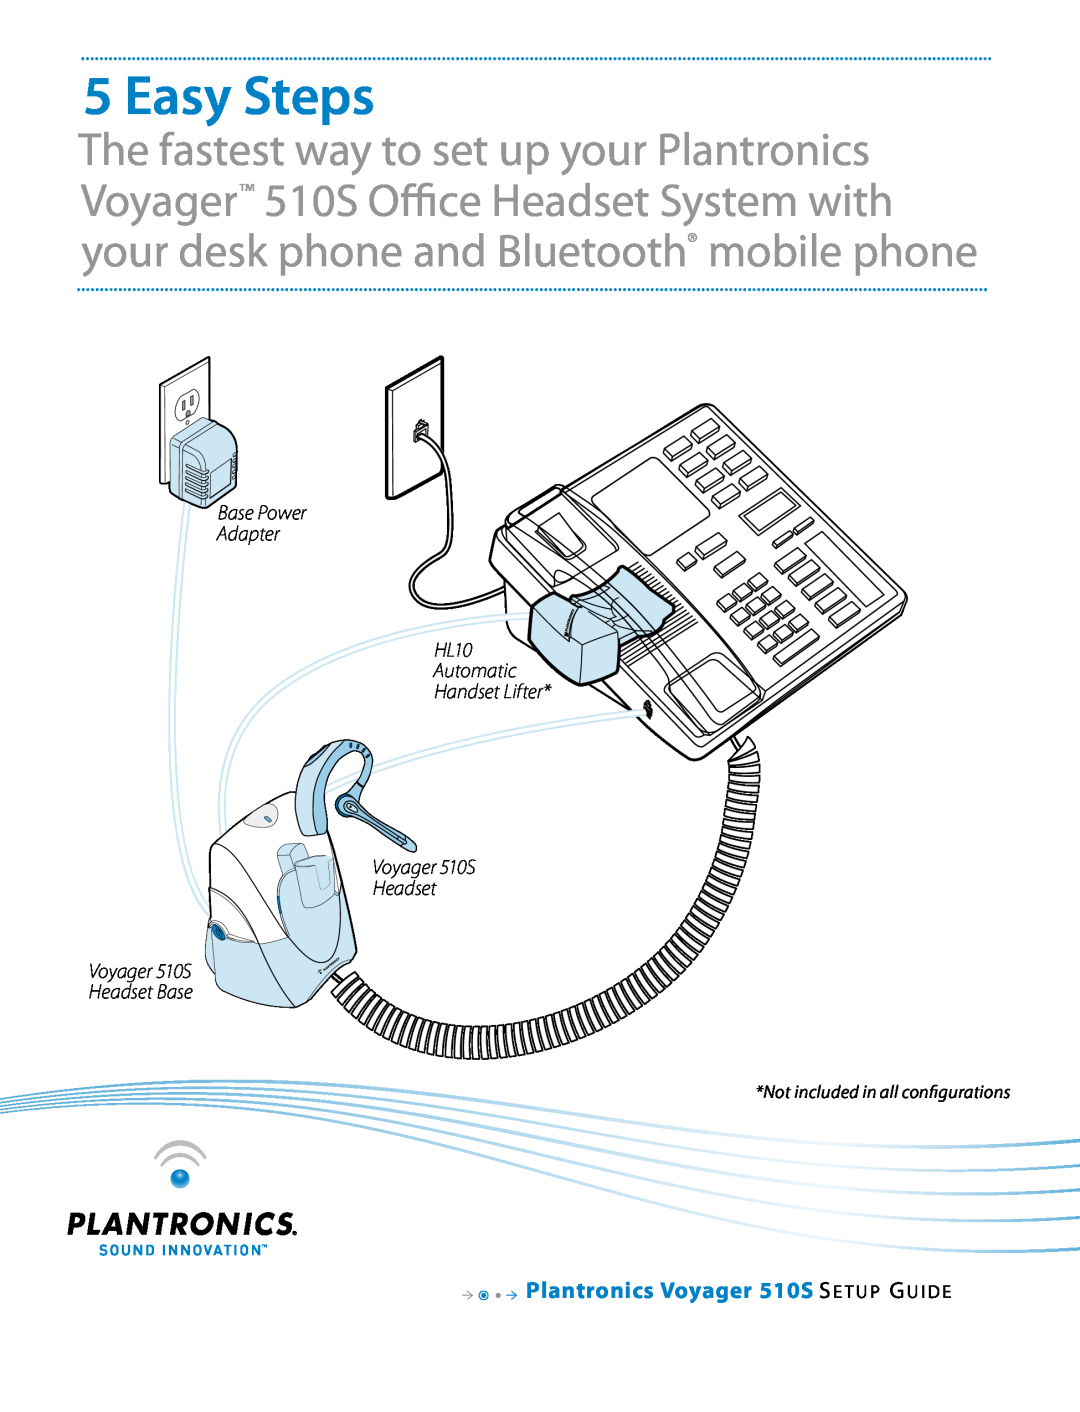 Plantronics setup guide Base Power Adapter HL10 Automatic Handset Lifter Voyager 510S Headset, Easy Steps 